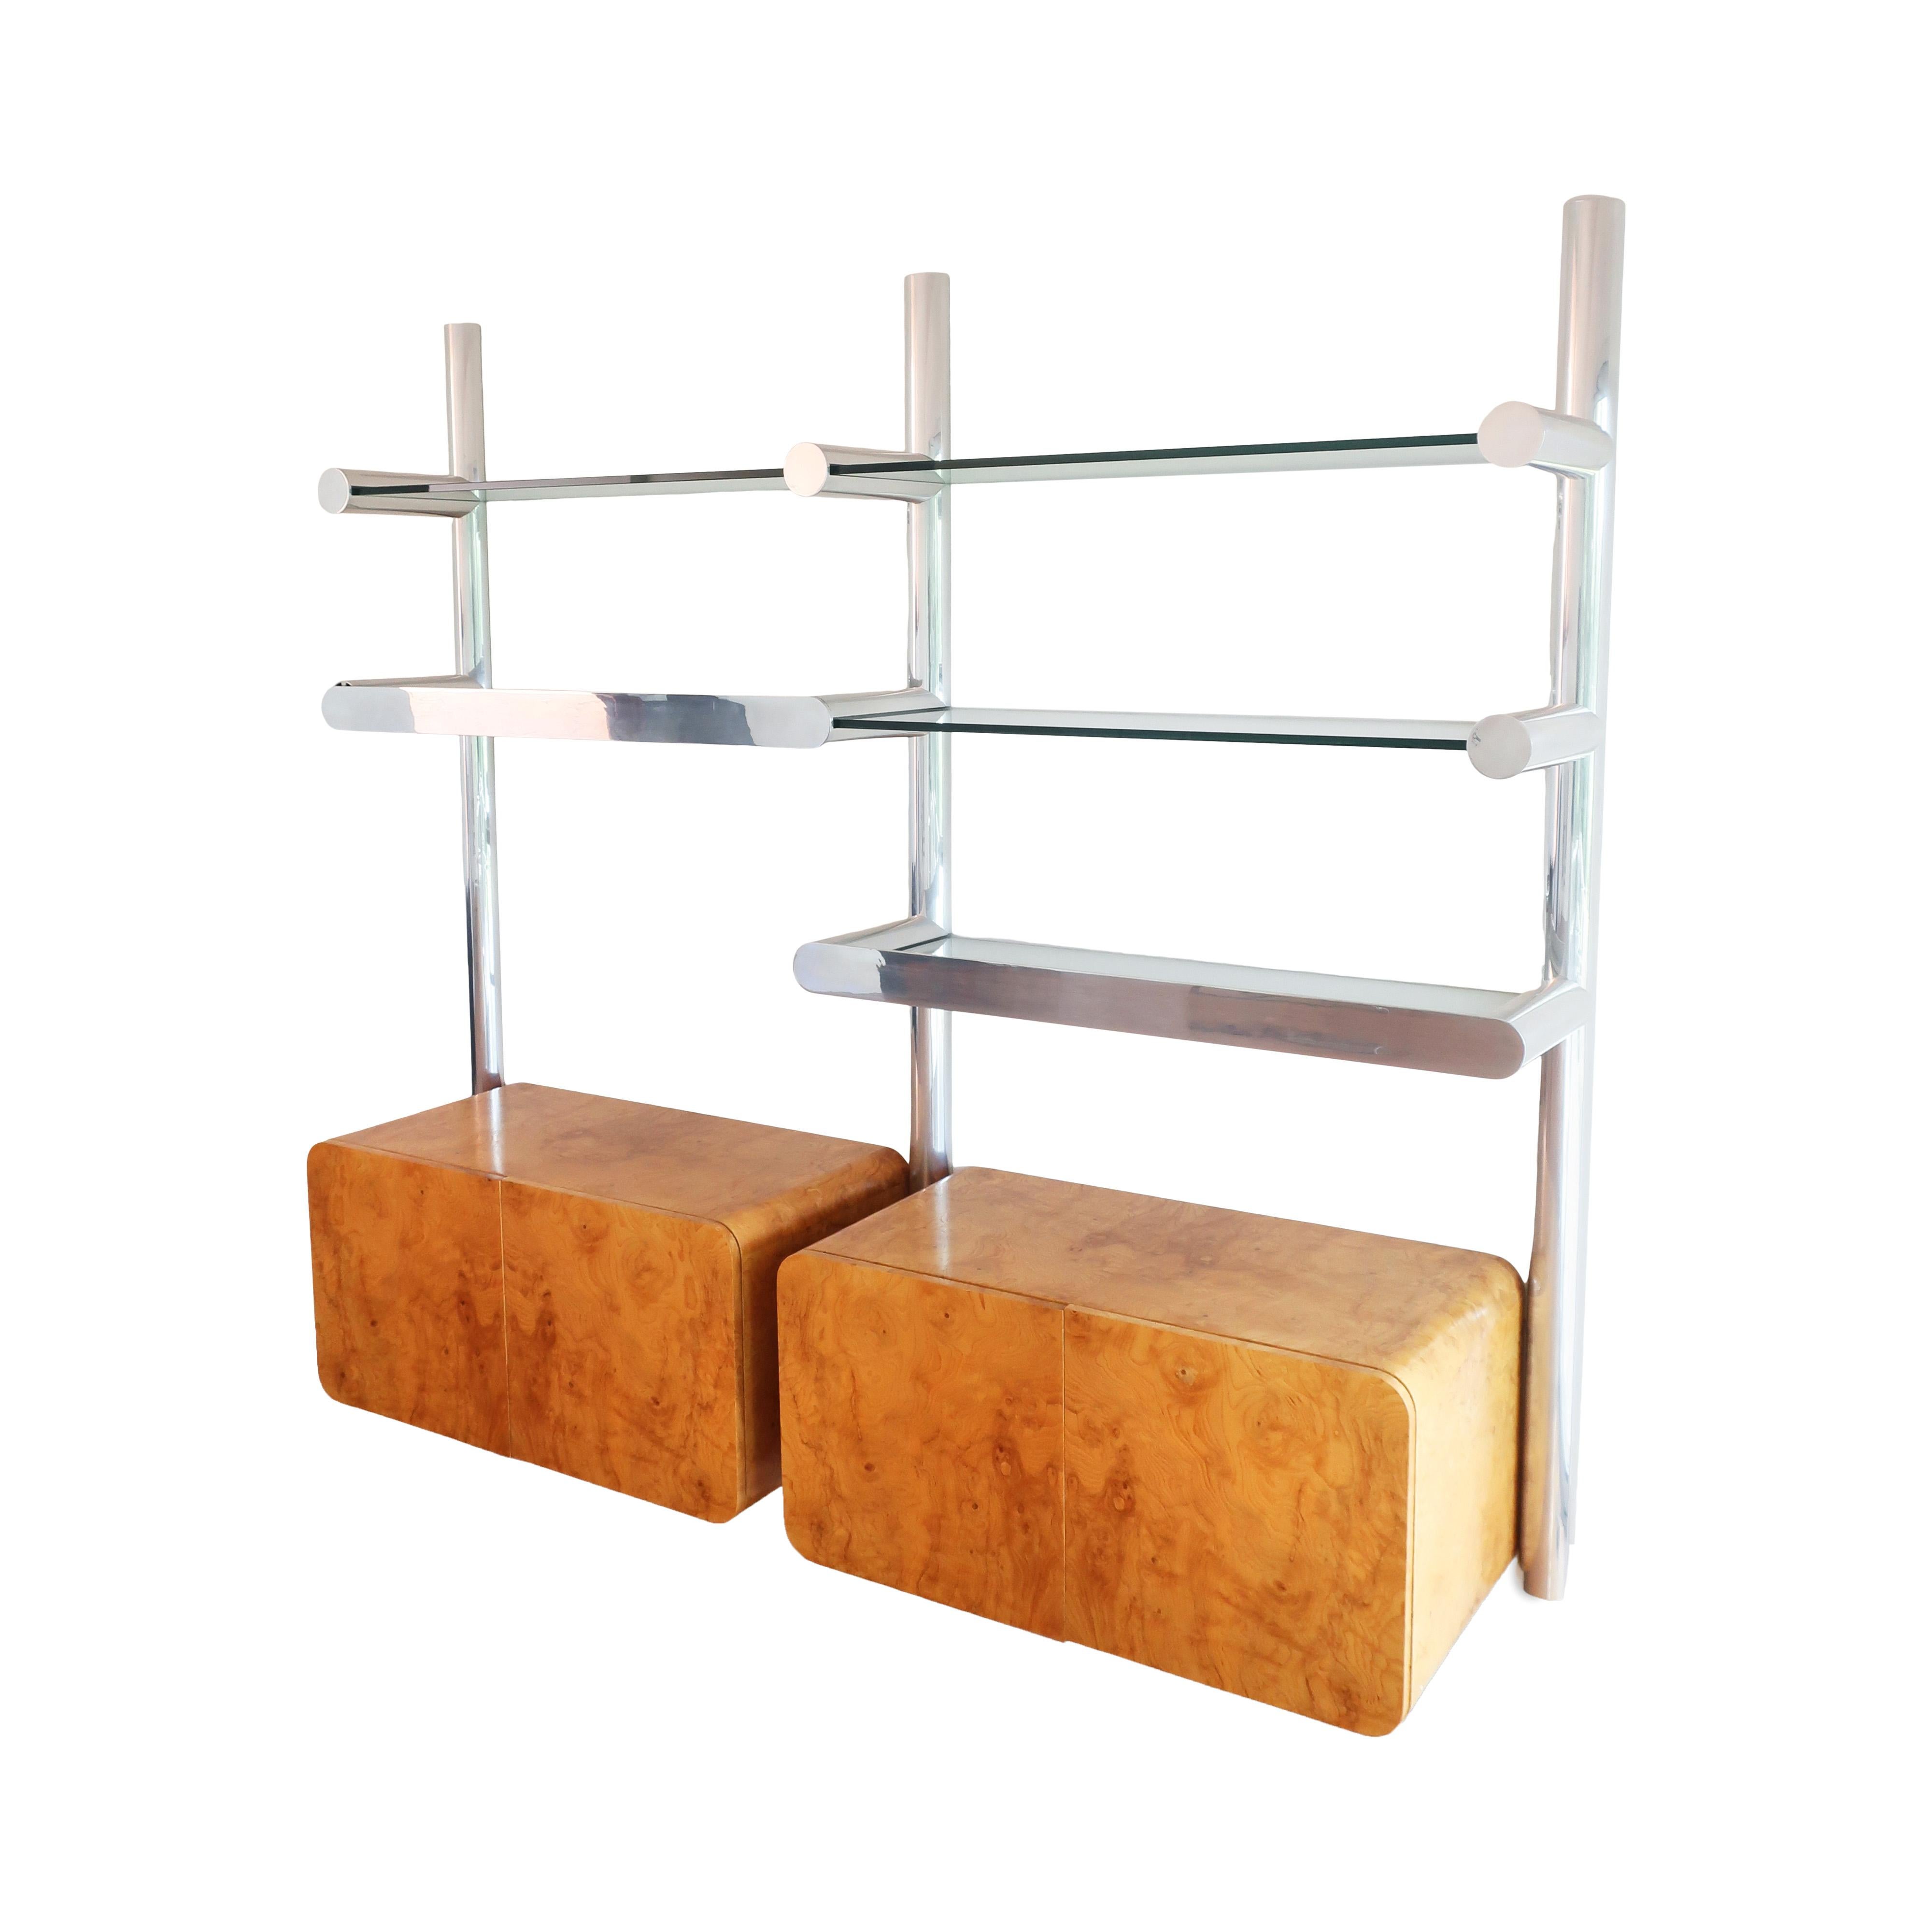 A stunning aluminum and glass Orba wall unit designed by Janet Schweitzer for the Pace Collection in 1974 with peak space age styling: innovative, sophisticated, and minimalist. Ingeniously designed with extruded tubes of polished rounded aluminum